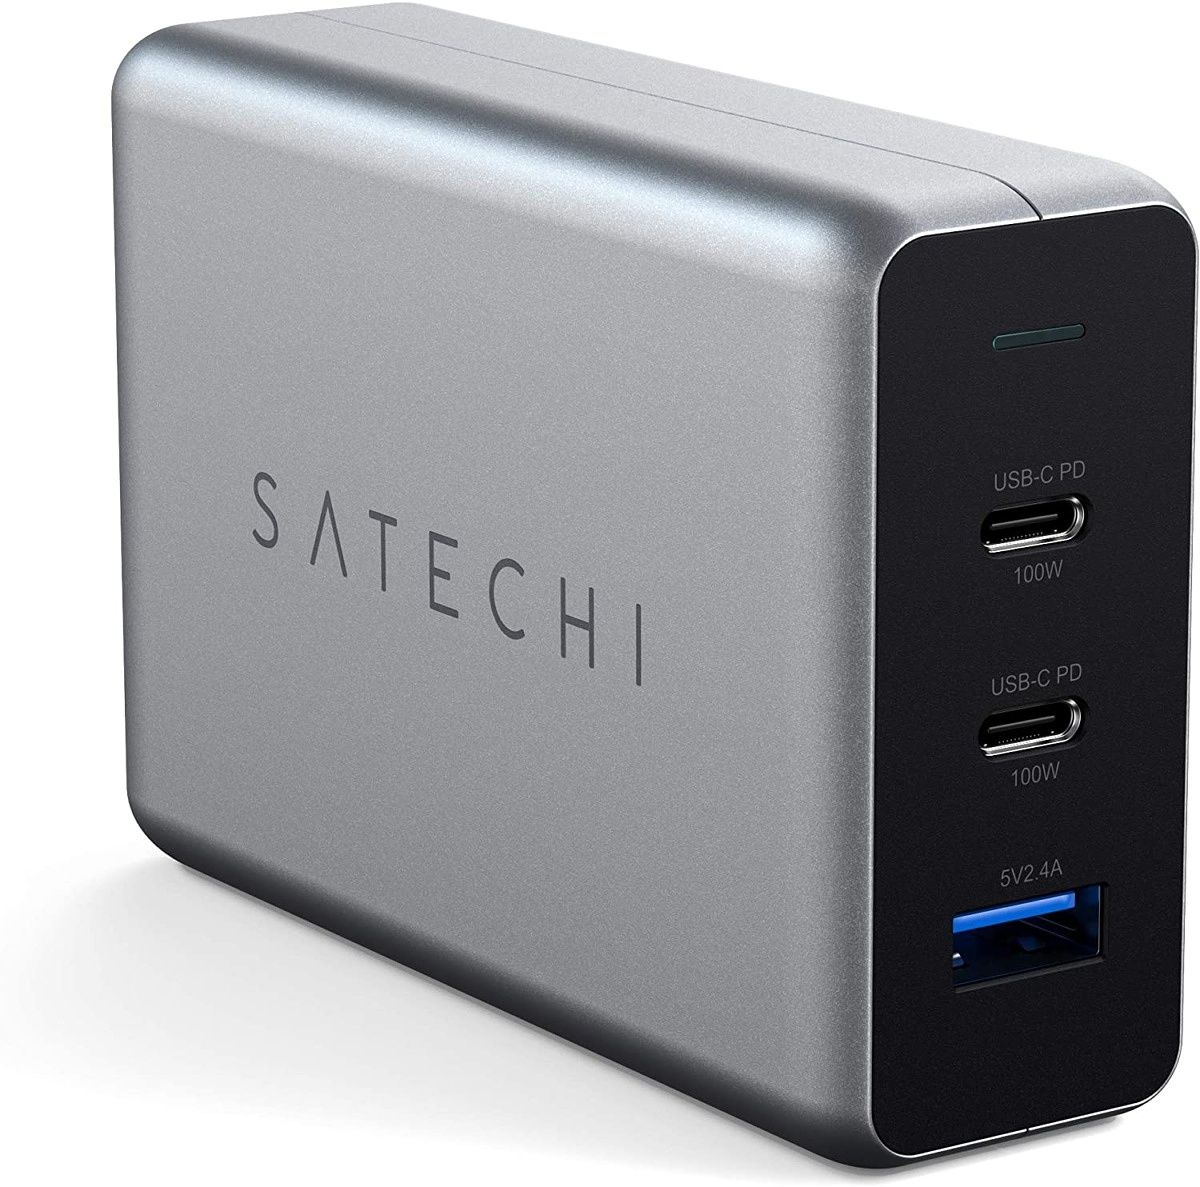 Satechi’s 100W USB PD charger comes with three ports -- two USB Type-C and one USB Type-A -- allowing to to charge up to three devices simultaneously. It uses GaN tech, resulting in a relatively compact body. While the USB Type-A port is capable of delivering up to 12W output, each of the Type-C ports can offer 100W charging when only one port is being used.